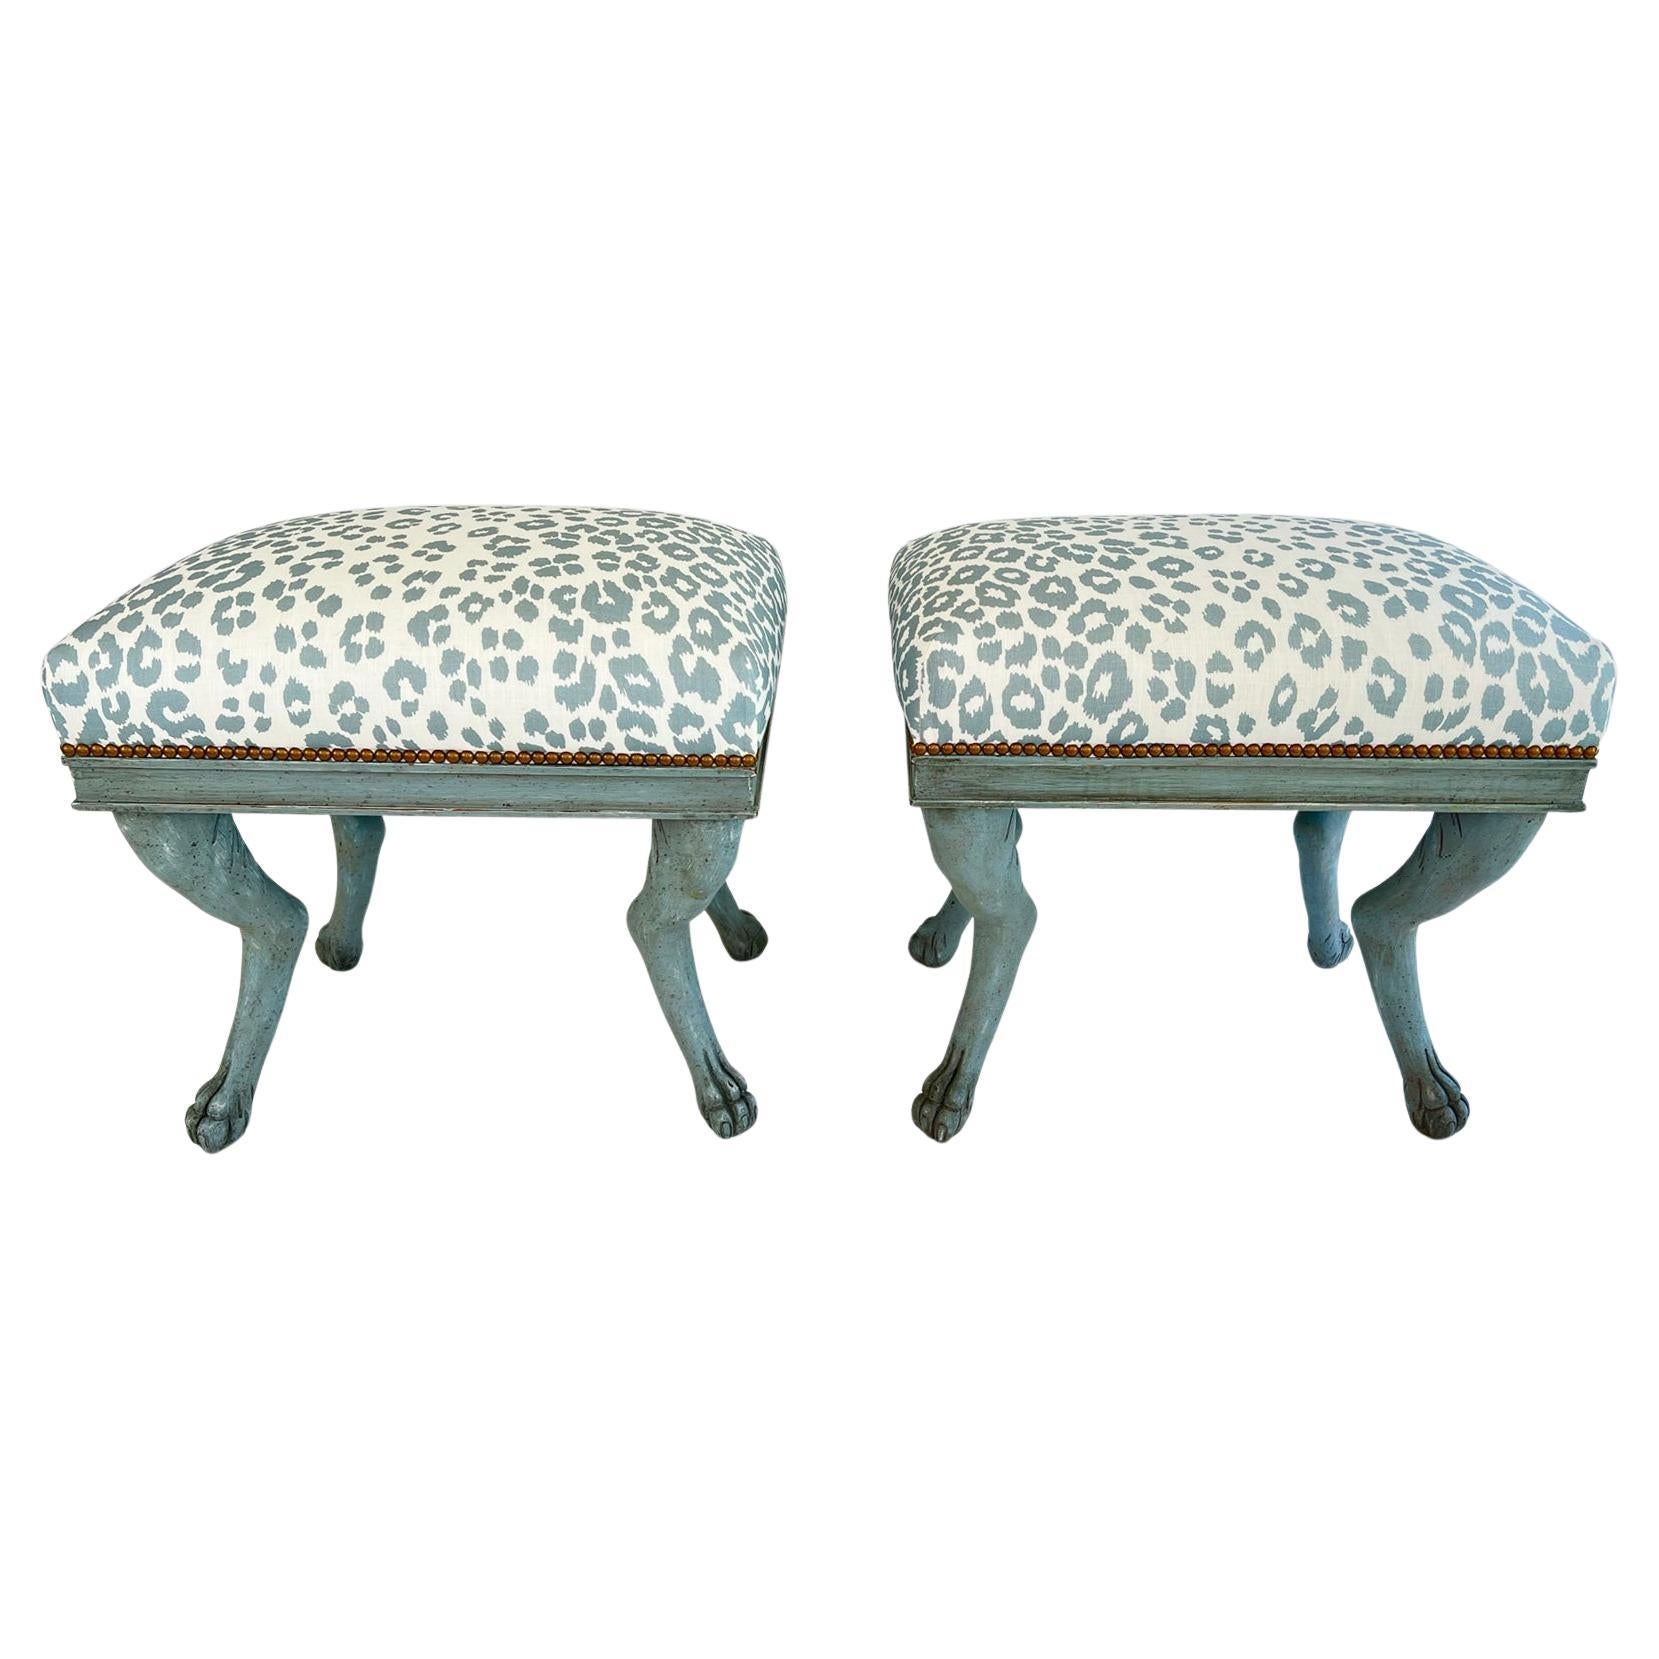 Pair of Painted Benches with Hock Legs and Paw Feet For Sale